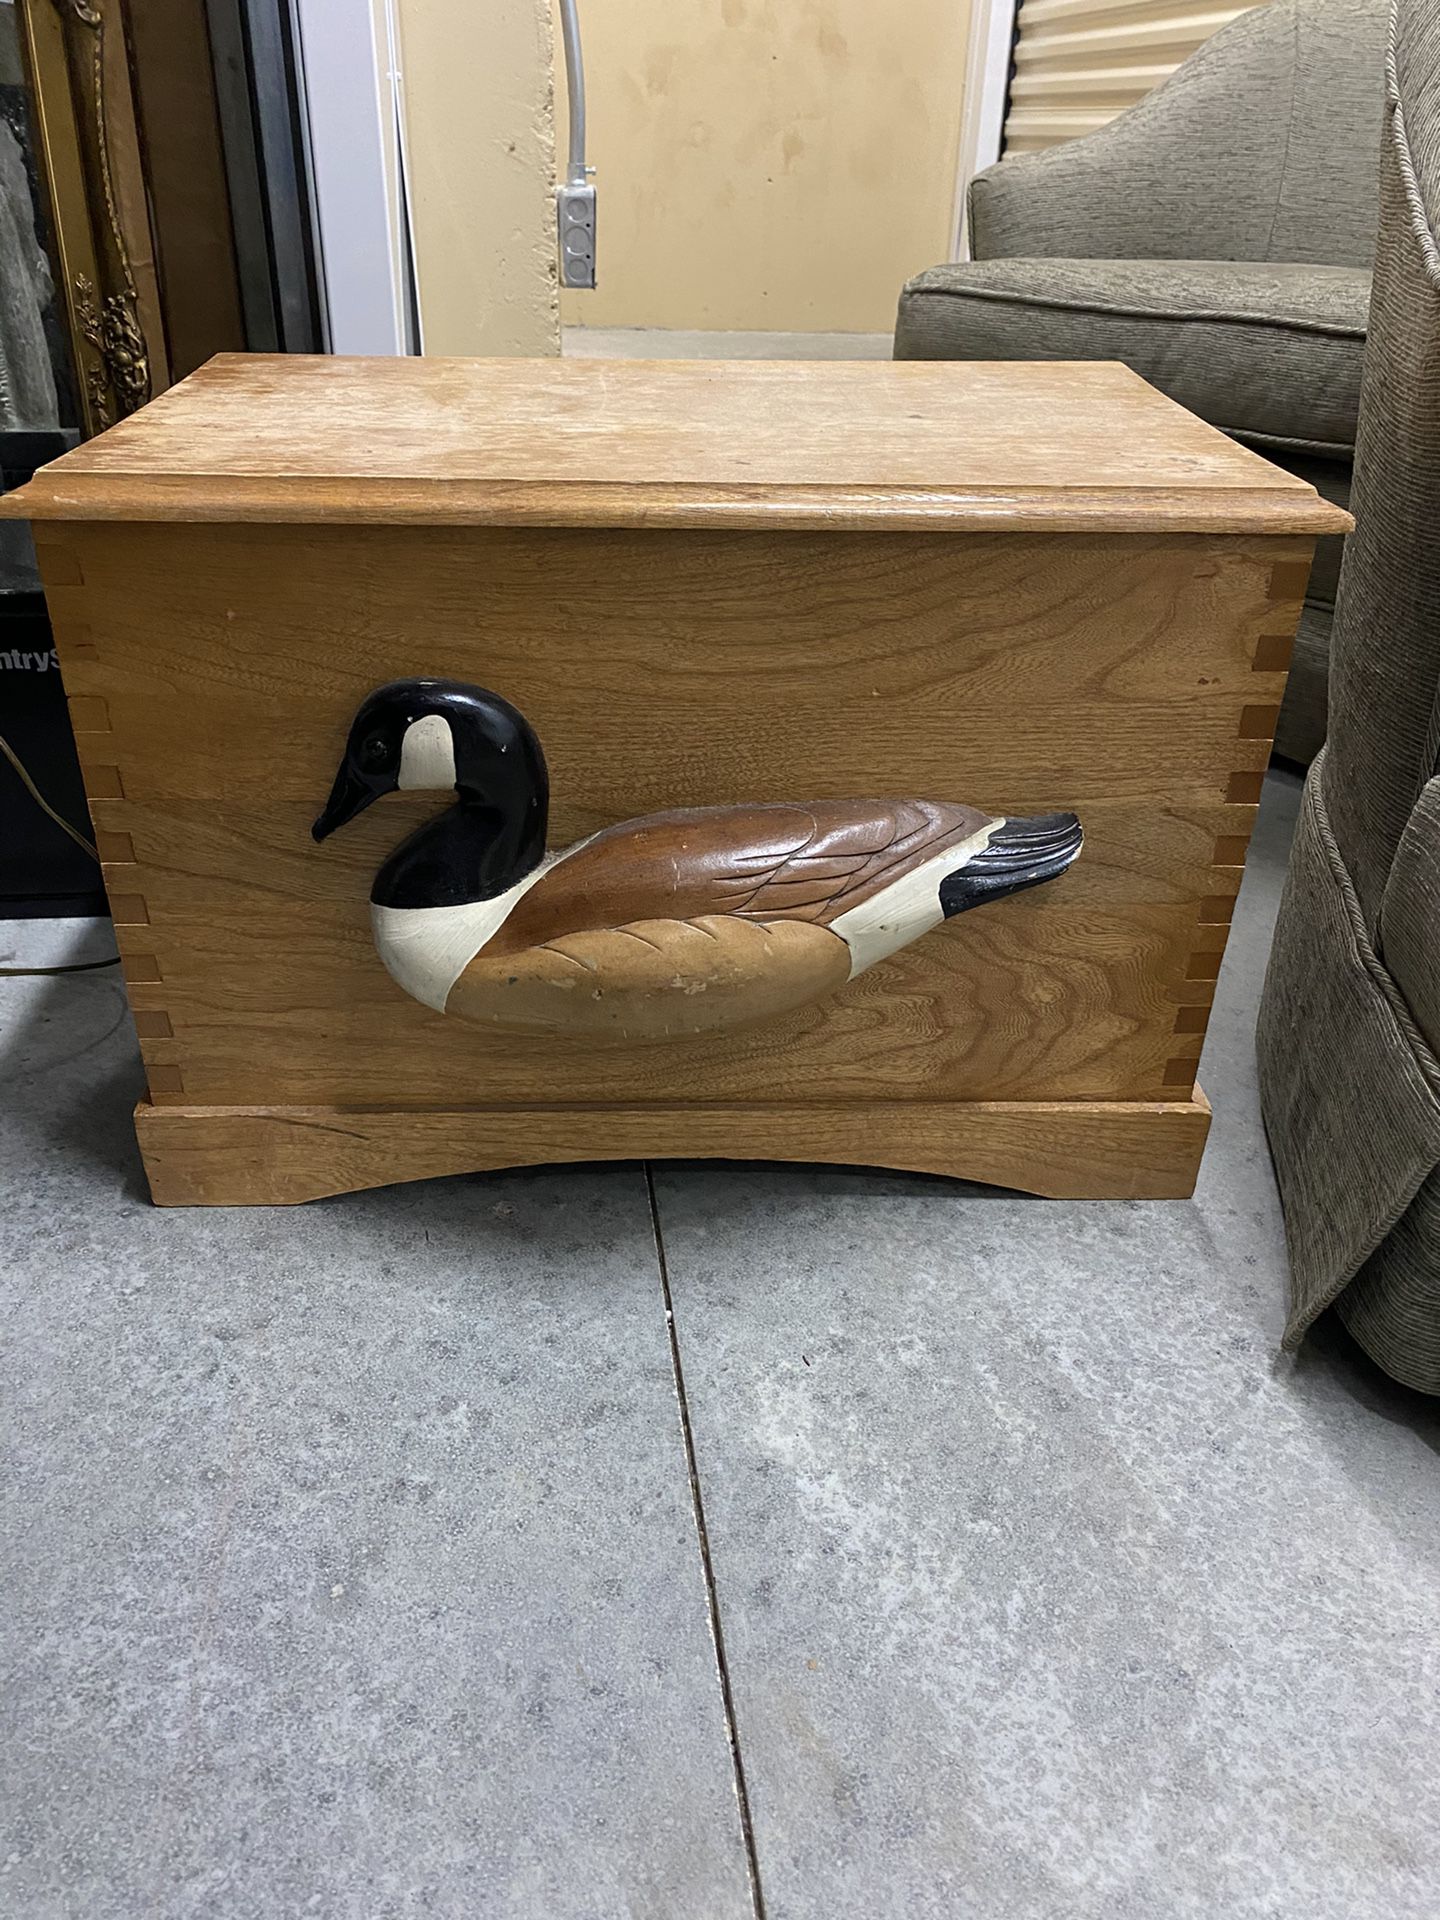 Chest / Night Stand / Side Table (Ducks Unlimited)